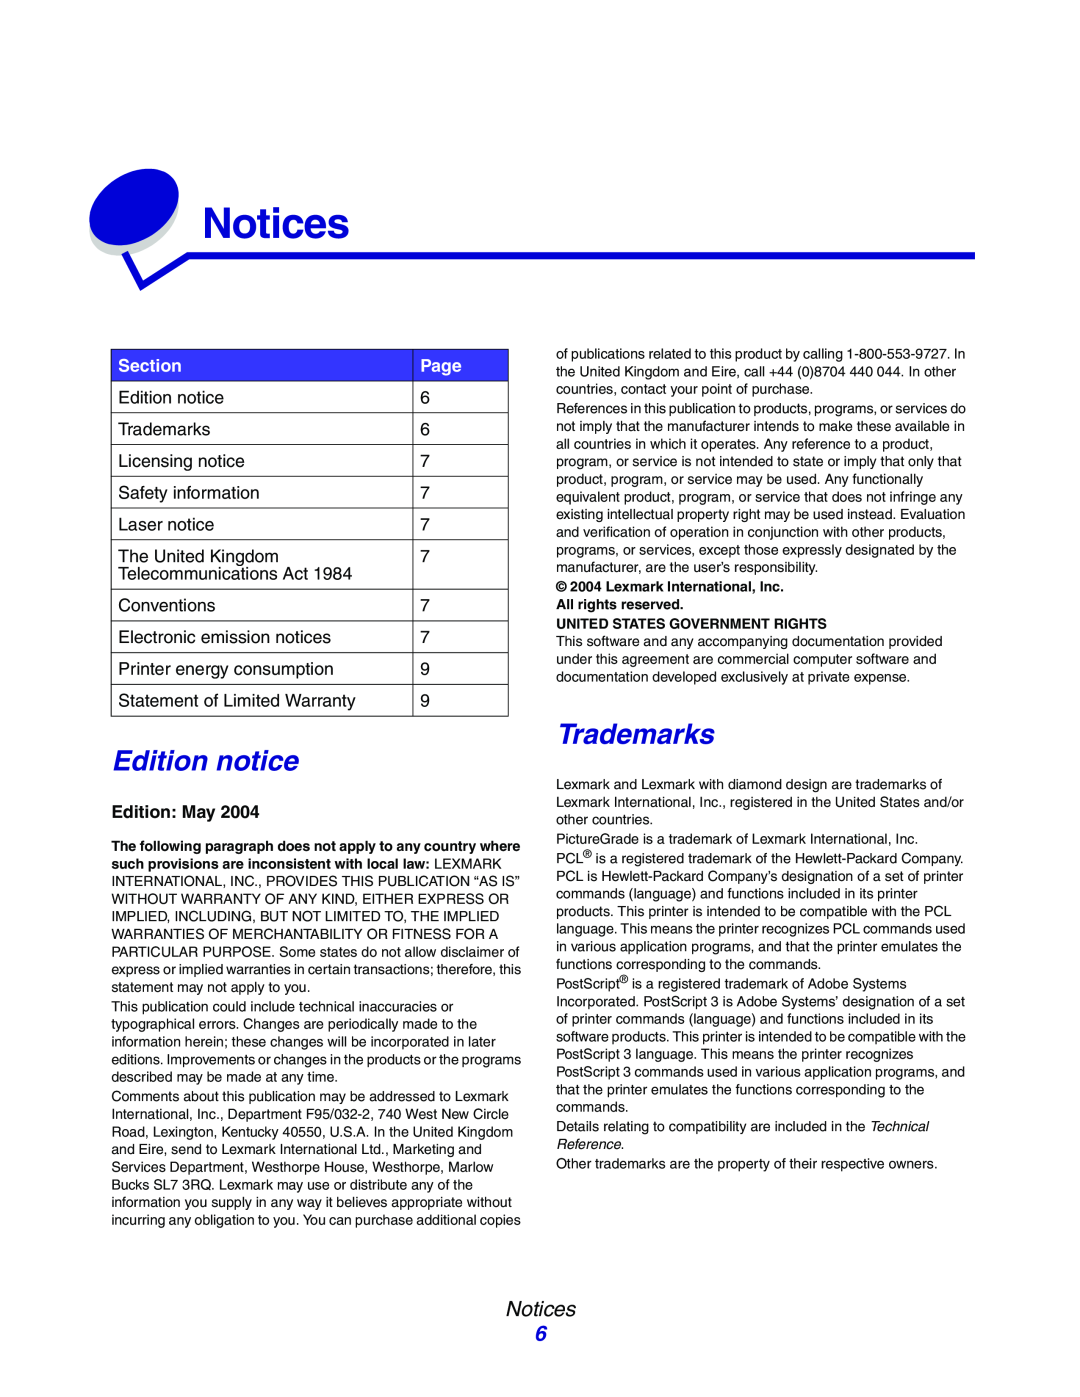 Lexmark E234N manual Notices, Edition notice, Trademarks, Section, Page, Edition: May 